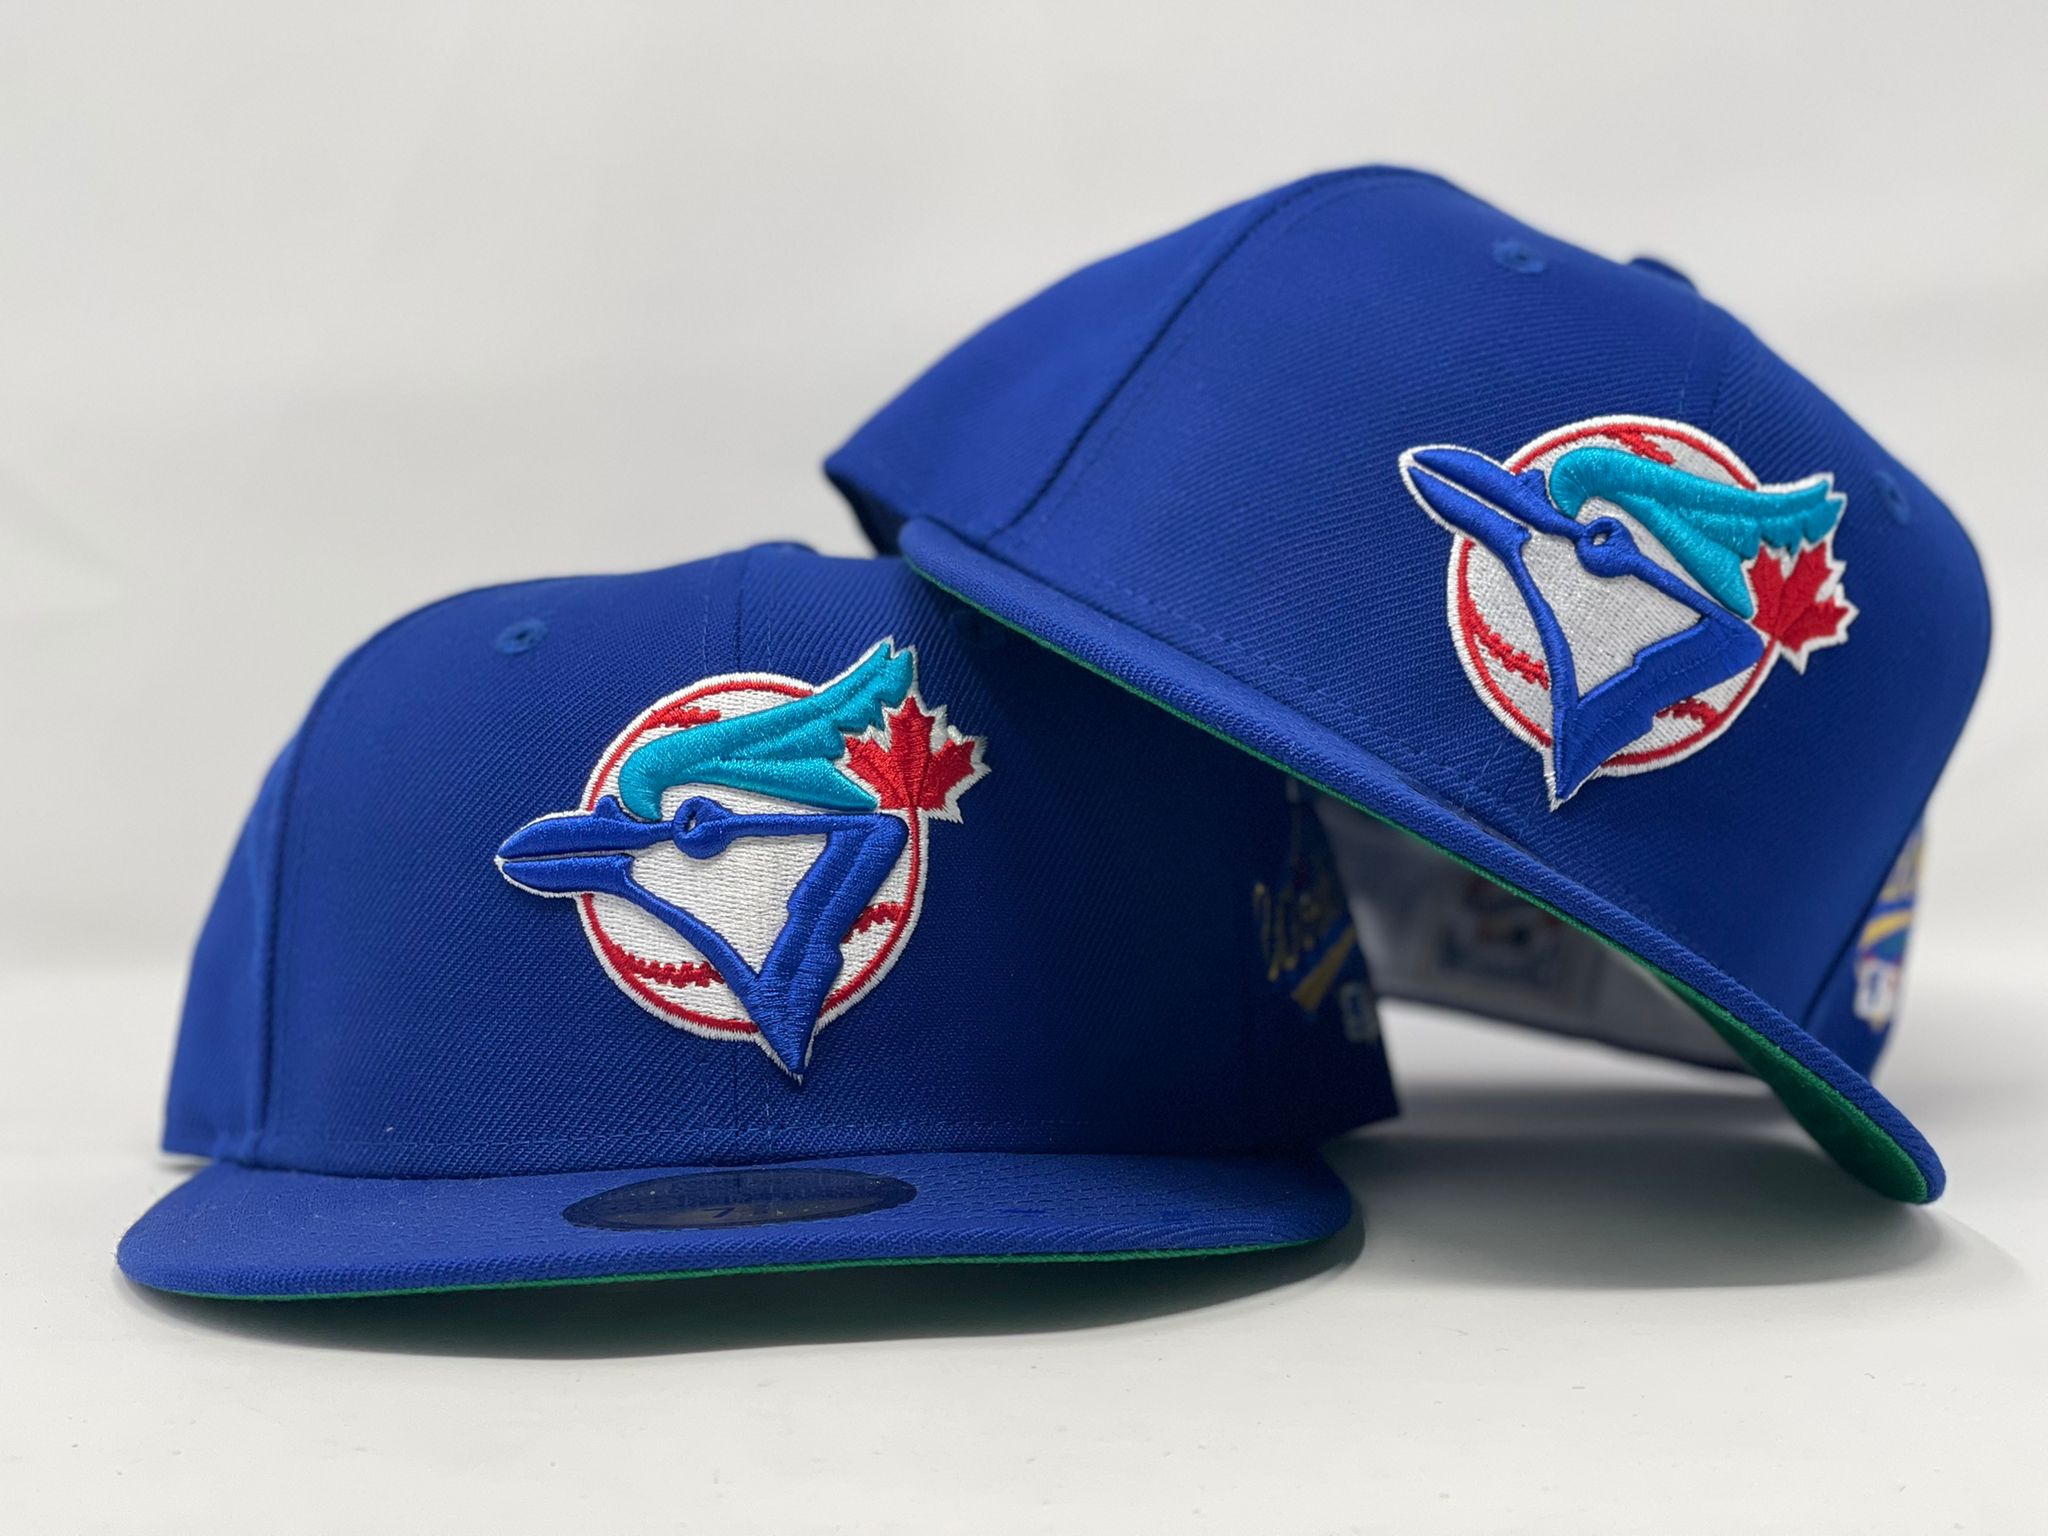 Toronto Blue Jays 1993 World Series New Era 59Fifty fitted hat cap blue